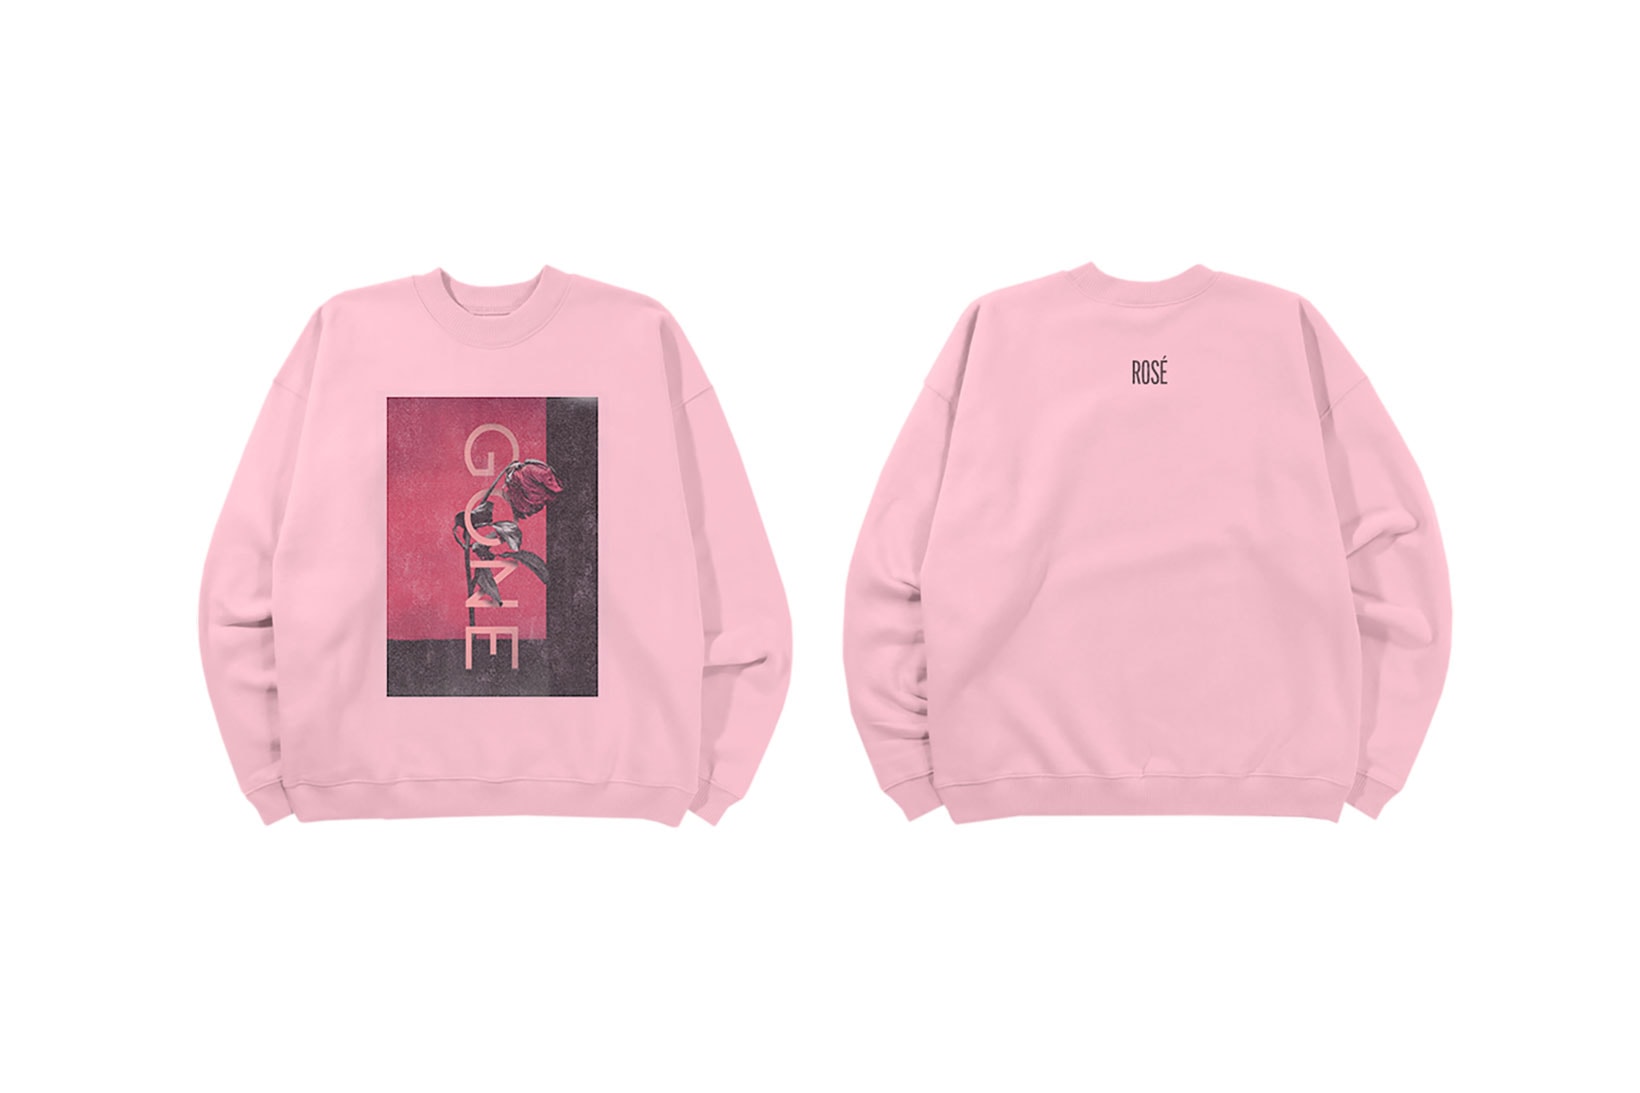 blackpink rose merch r solo project on the ground gone crewneck sweater pink front back